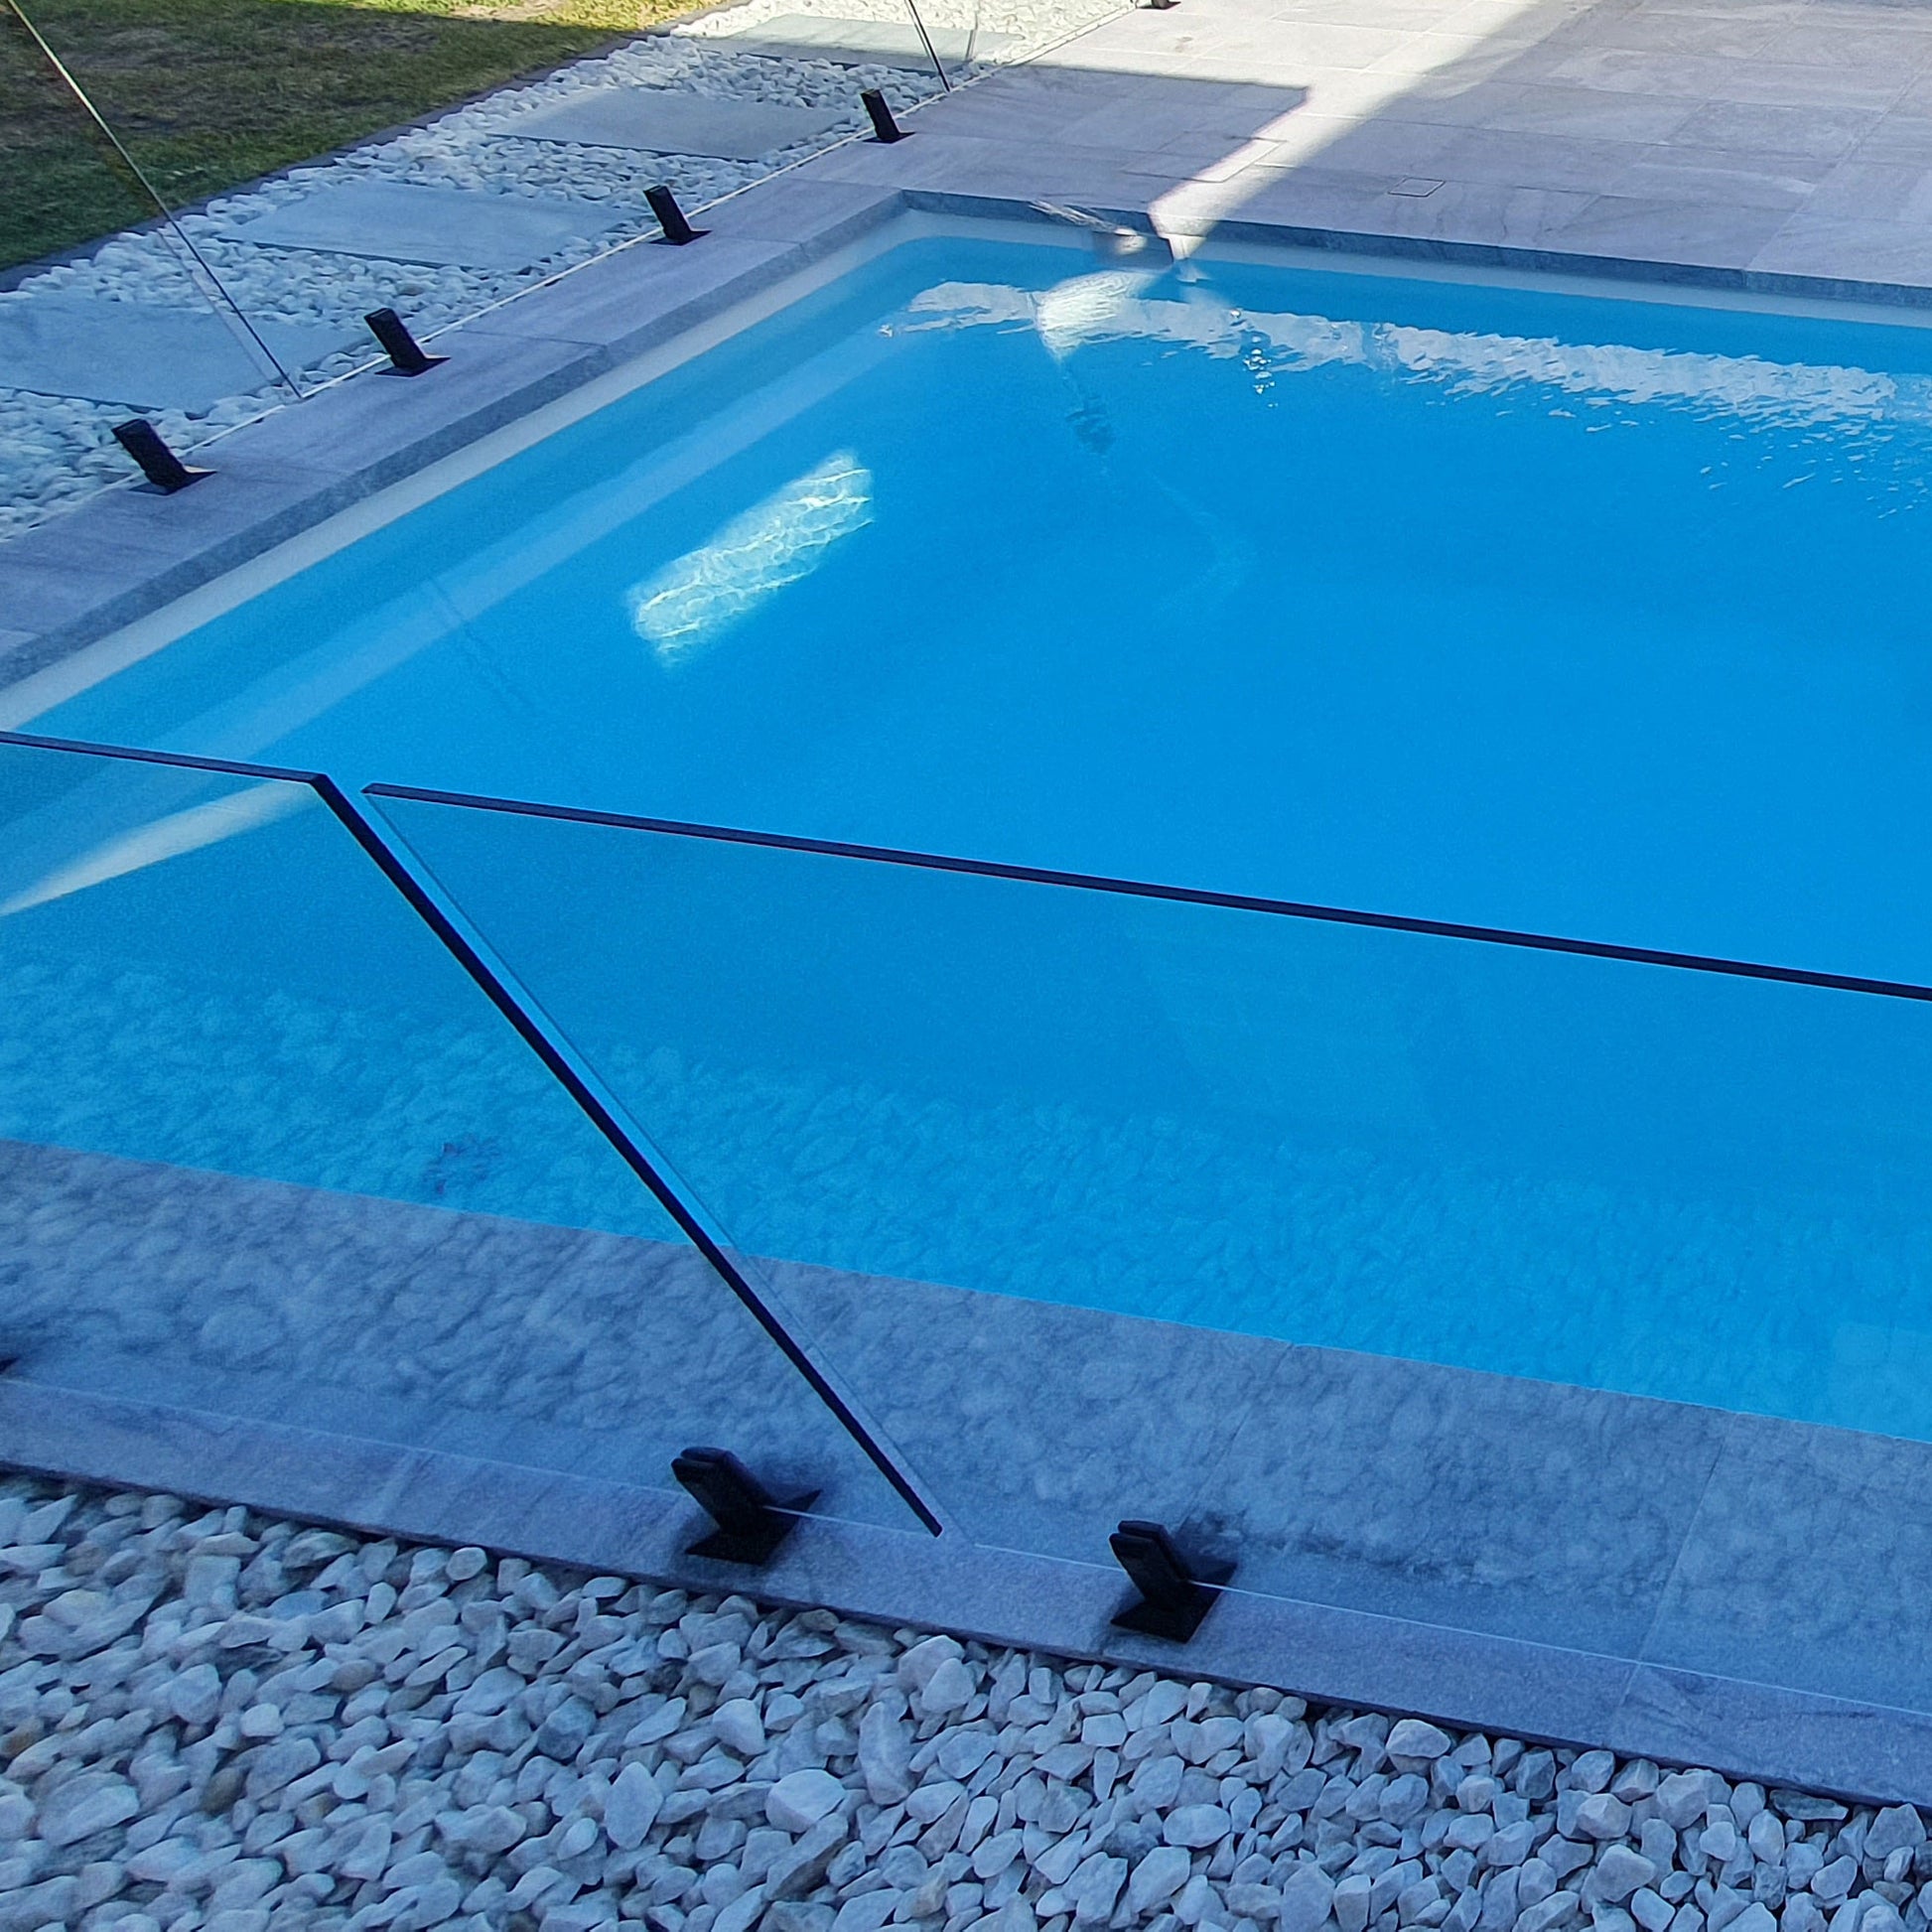 Argento Sandblasted Tumbled Limestone 600x400x30mm Natural Stone Pavers - 1st Quality - Swimming Pool Edge - Available at iPave Natural Stone